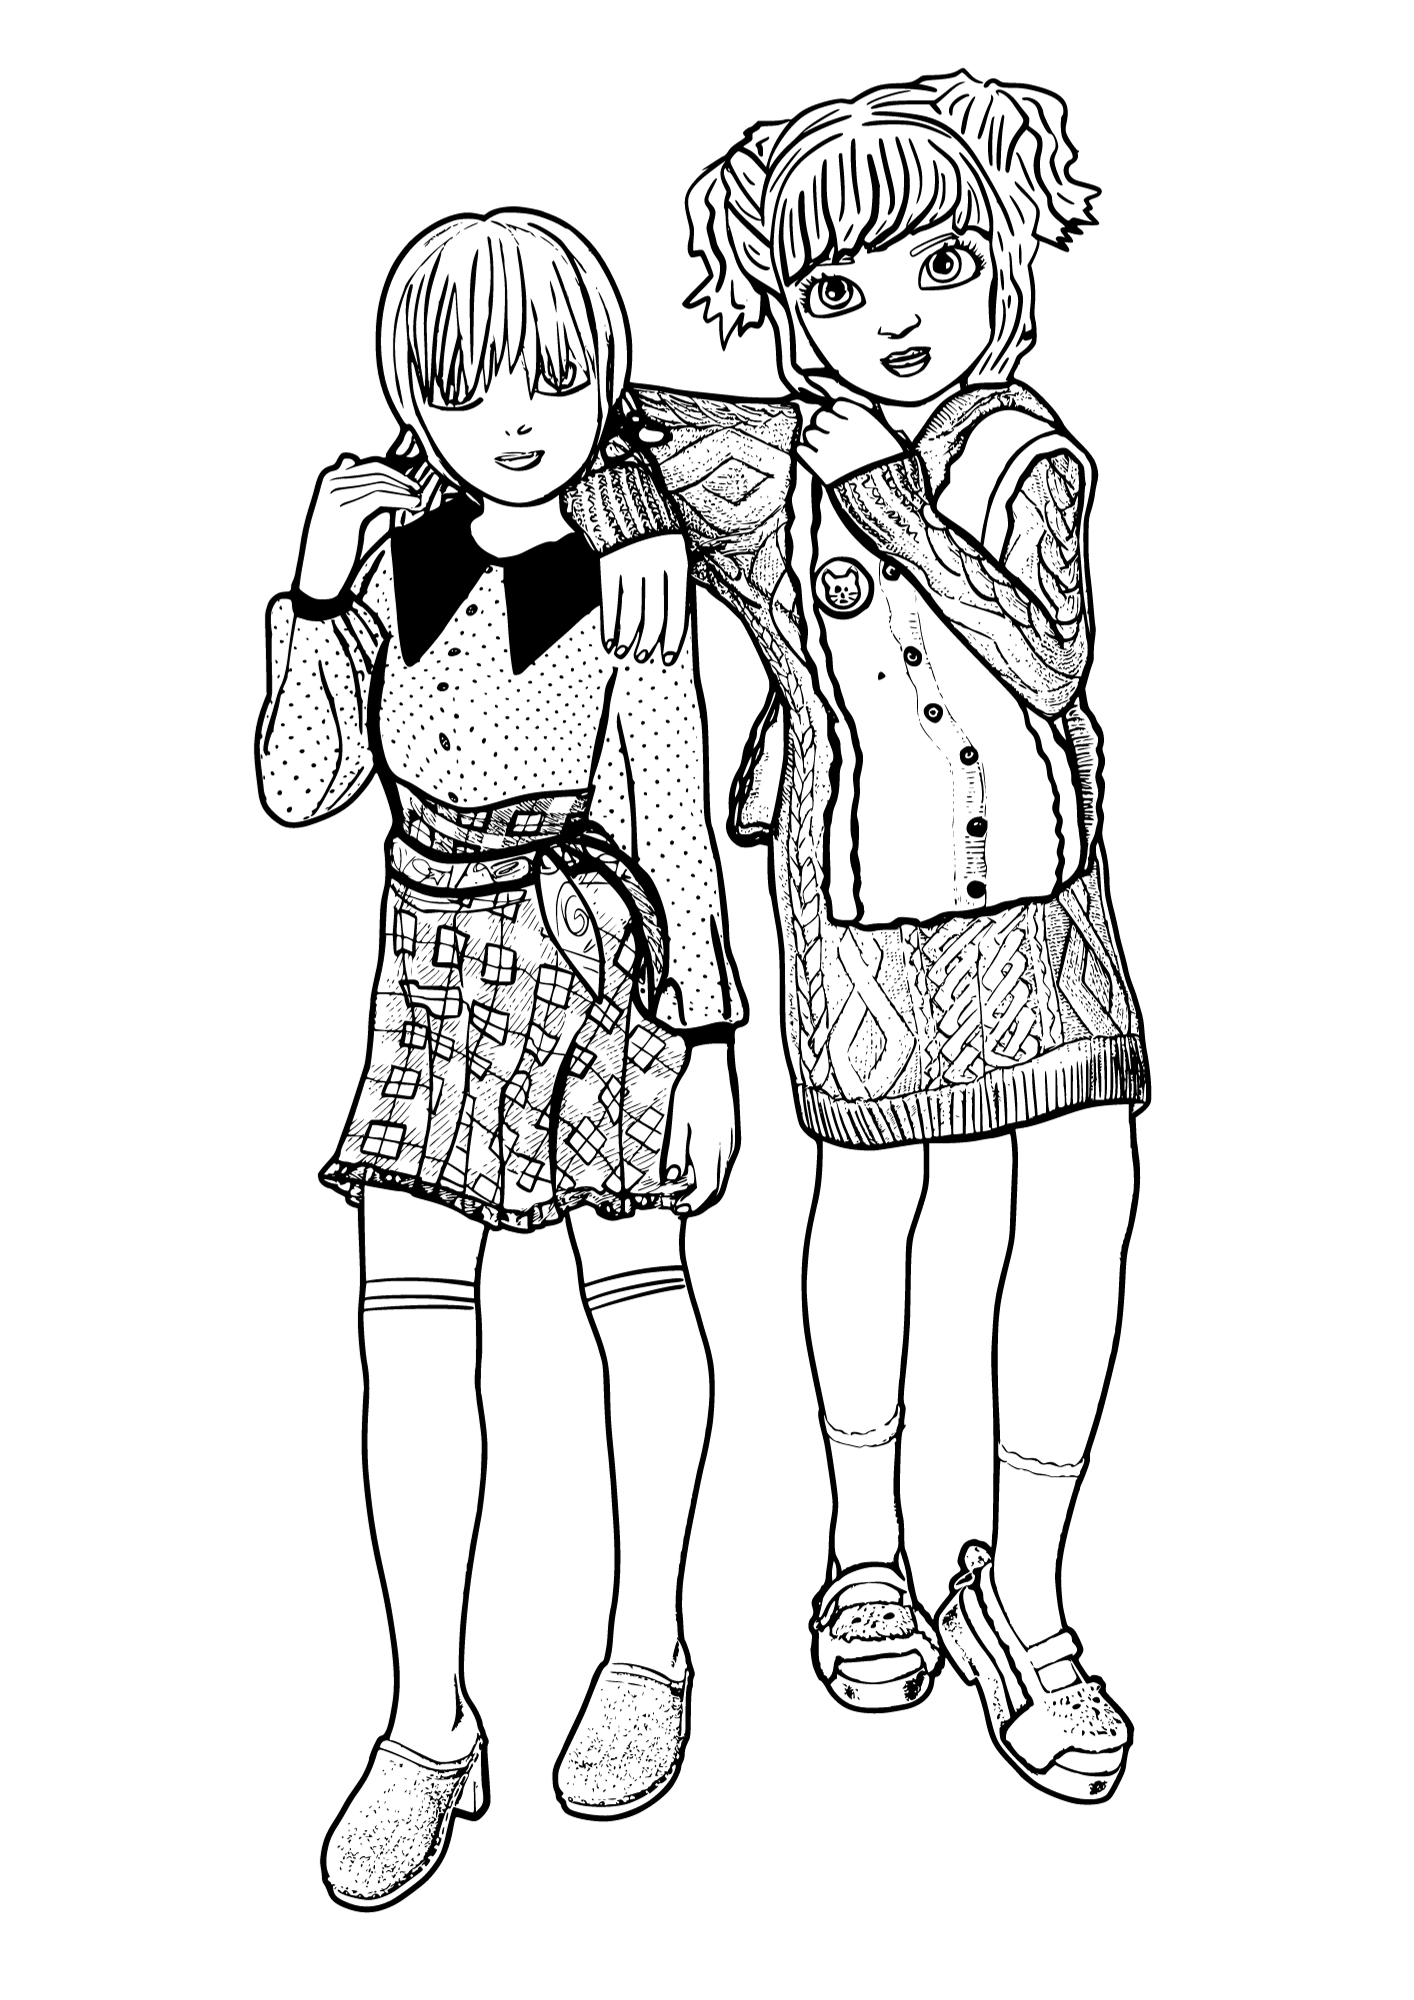 Black and white sketch of fashionable friends for coloring